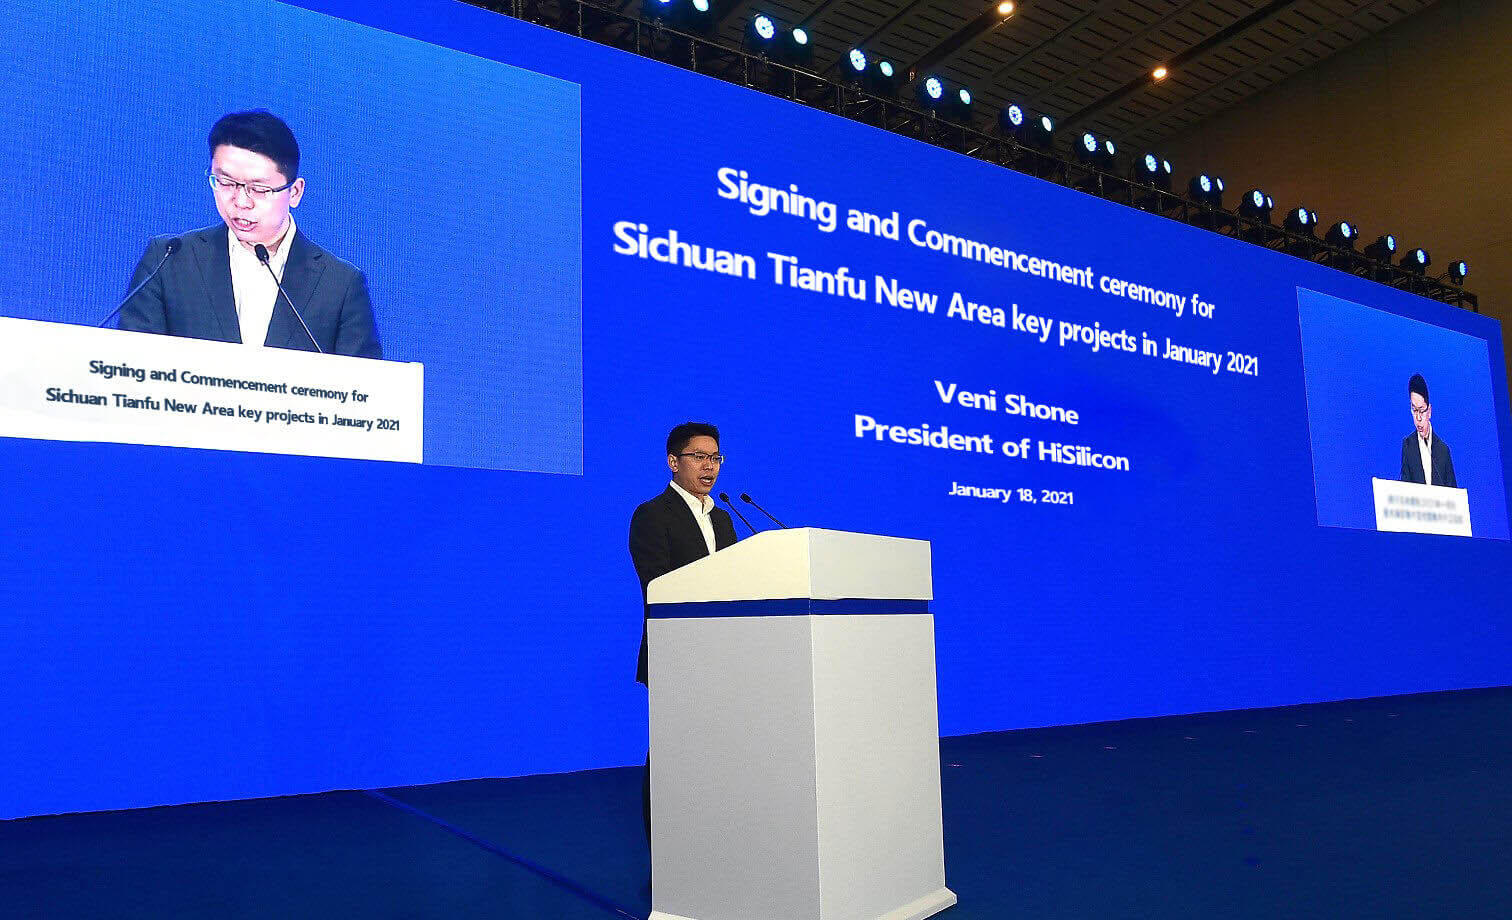 Xiong Wei, President of Shanghai Hisilicon, delivered a speech at China's XR industrial center